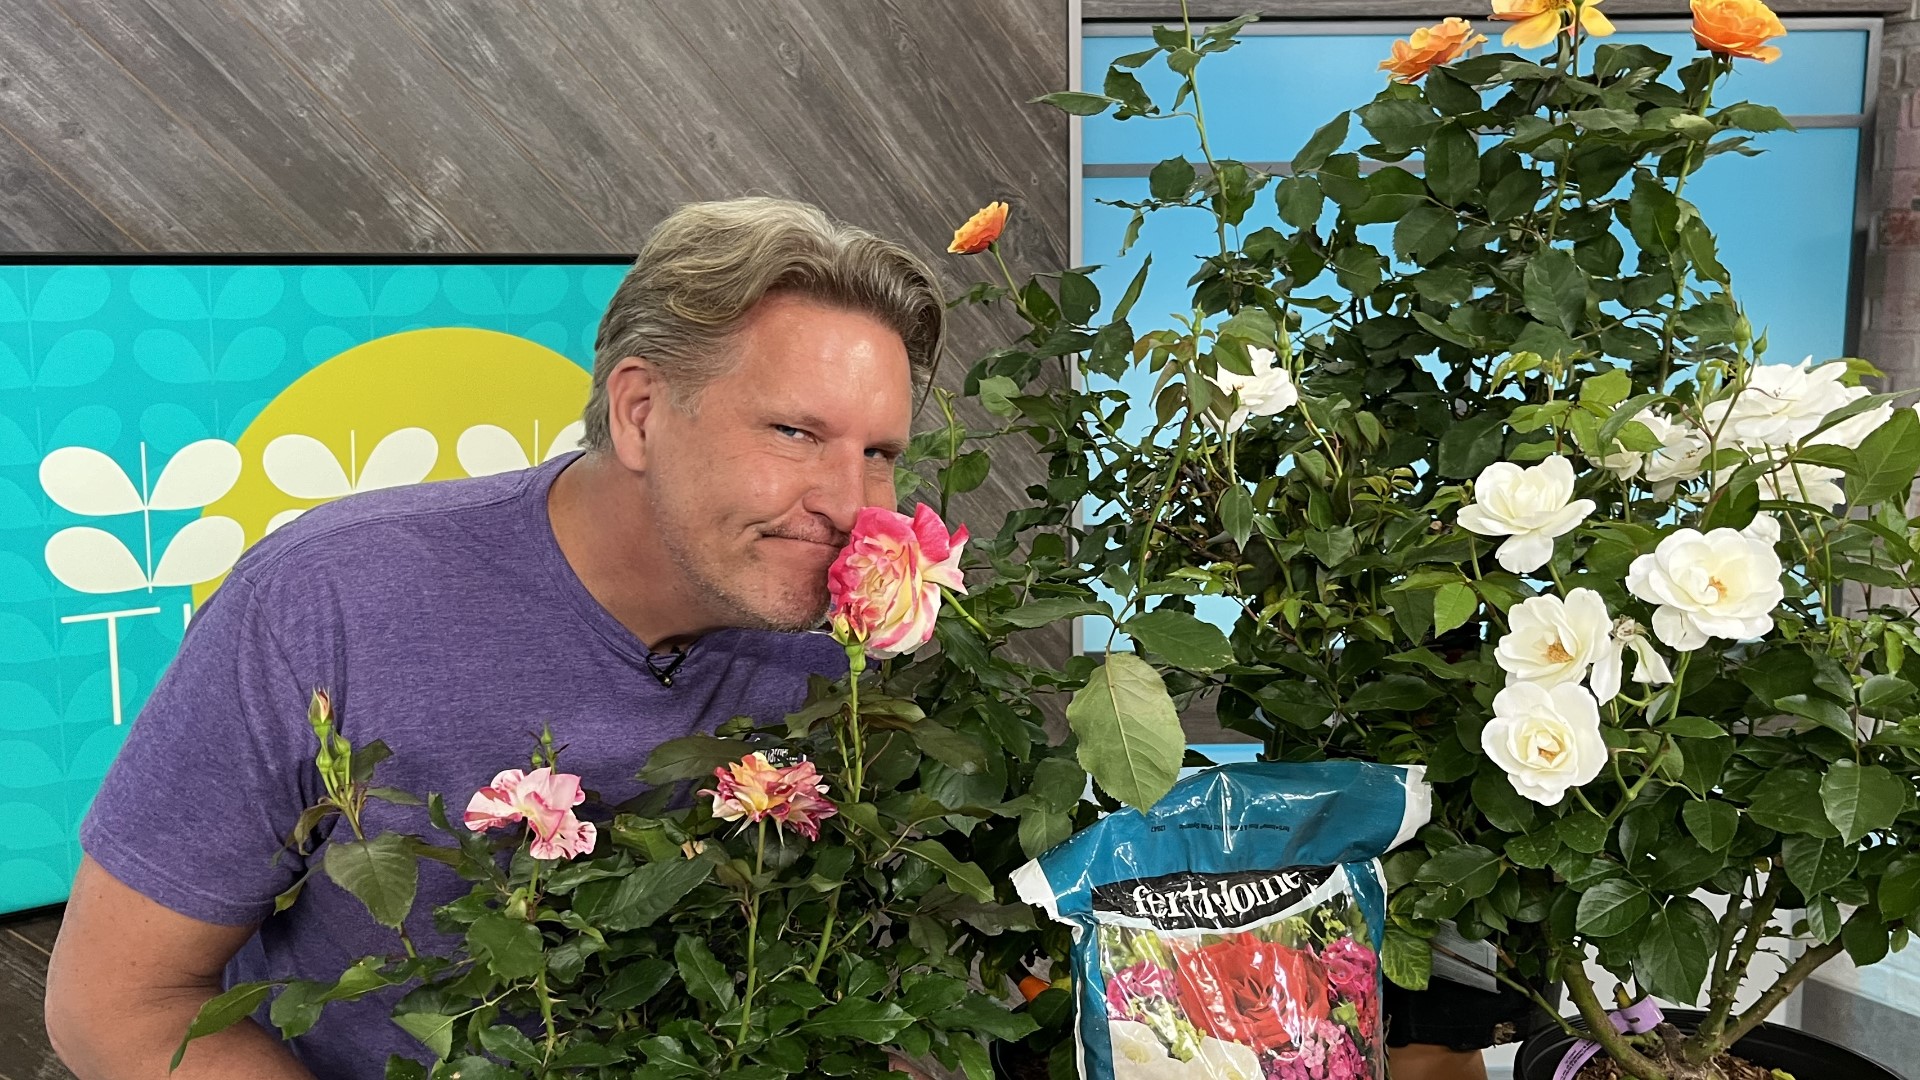 An important step in growing roses is know what variety you want to grow. Chris H. Olsen explains how types of this flower determine what care is needed.